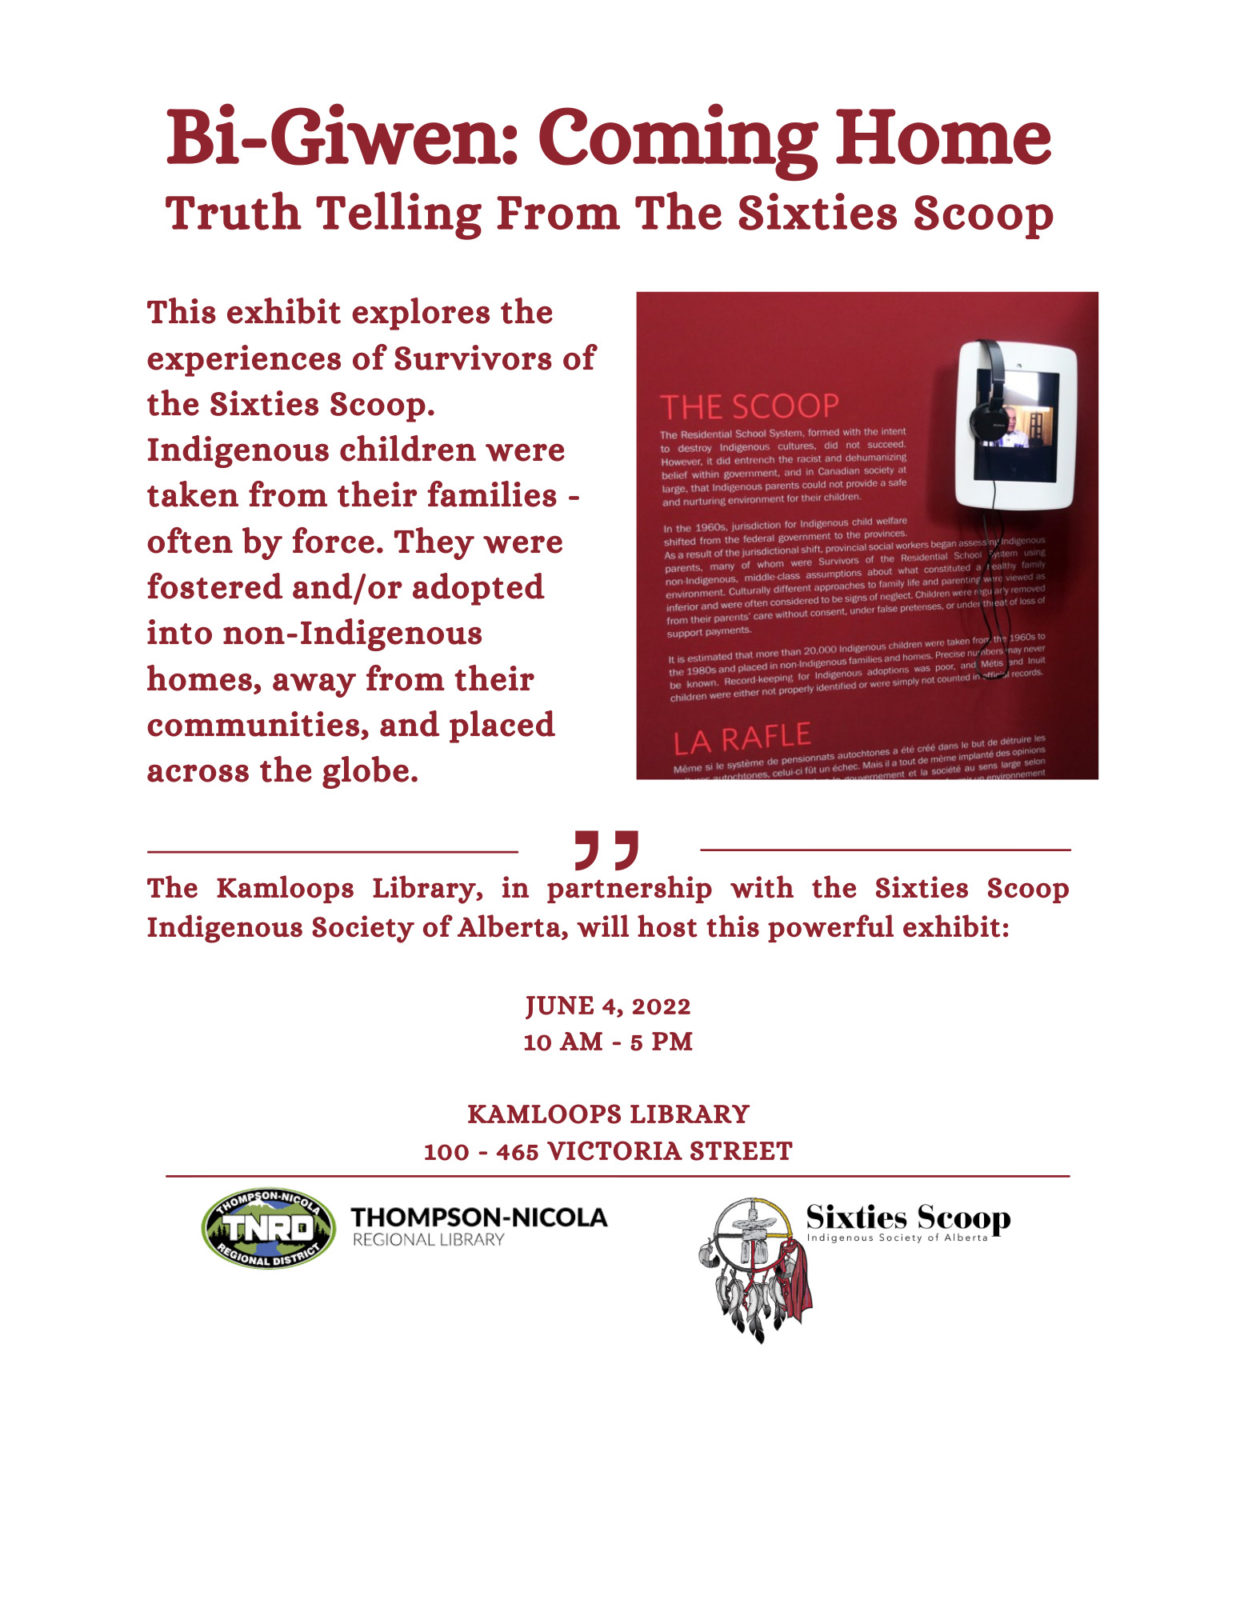 Separating children from parents: The Sixties Scoop in Canada 